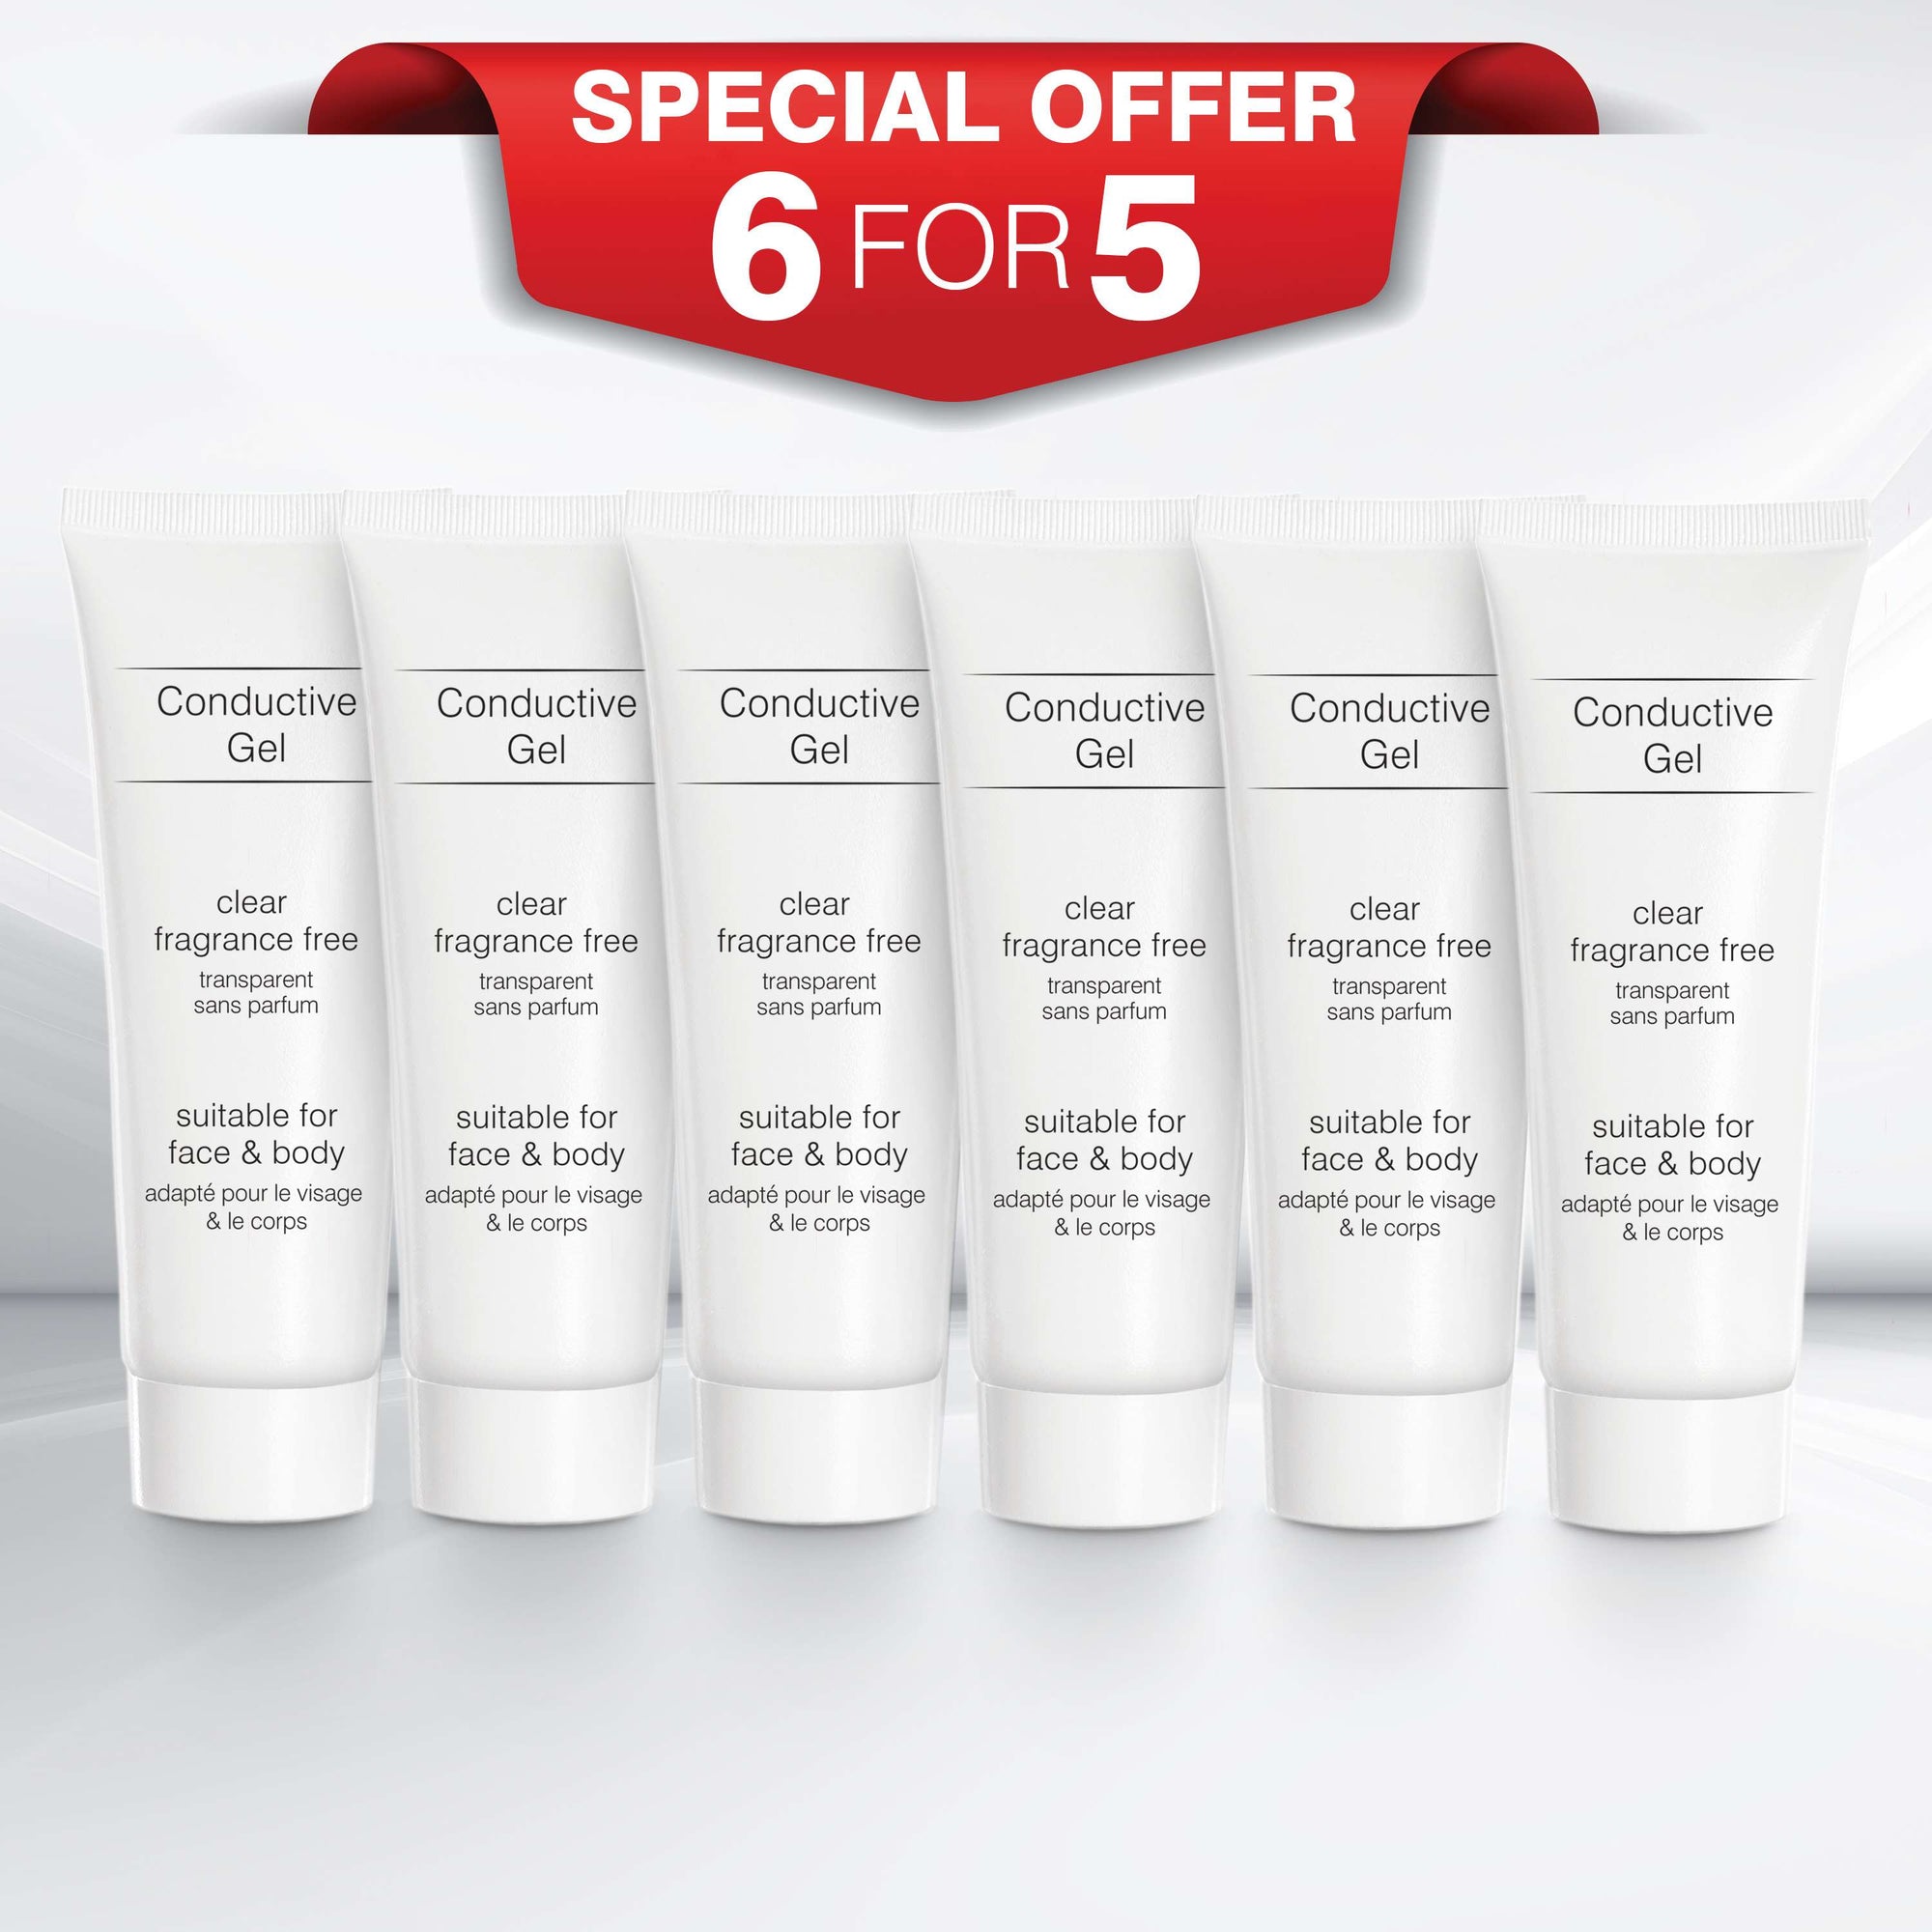 6 tubes of conductive gel for the price of 5 promotional offer while stocks last